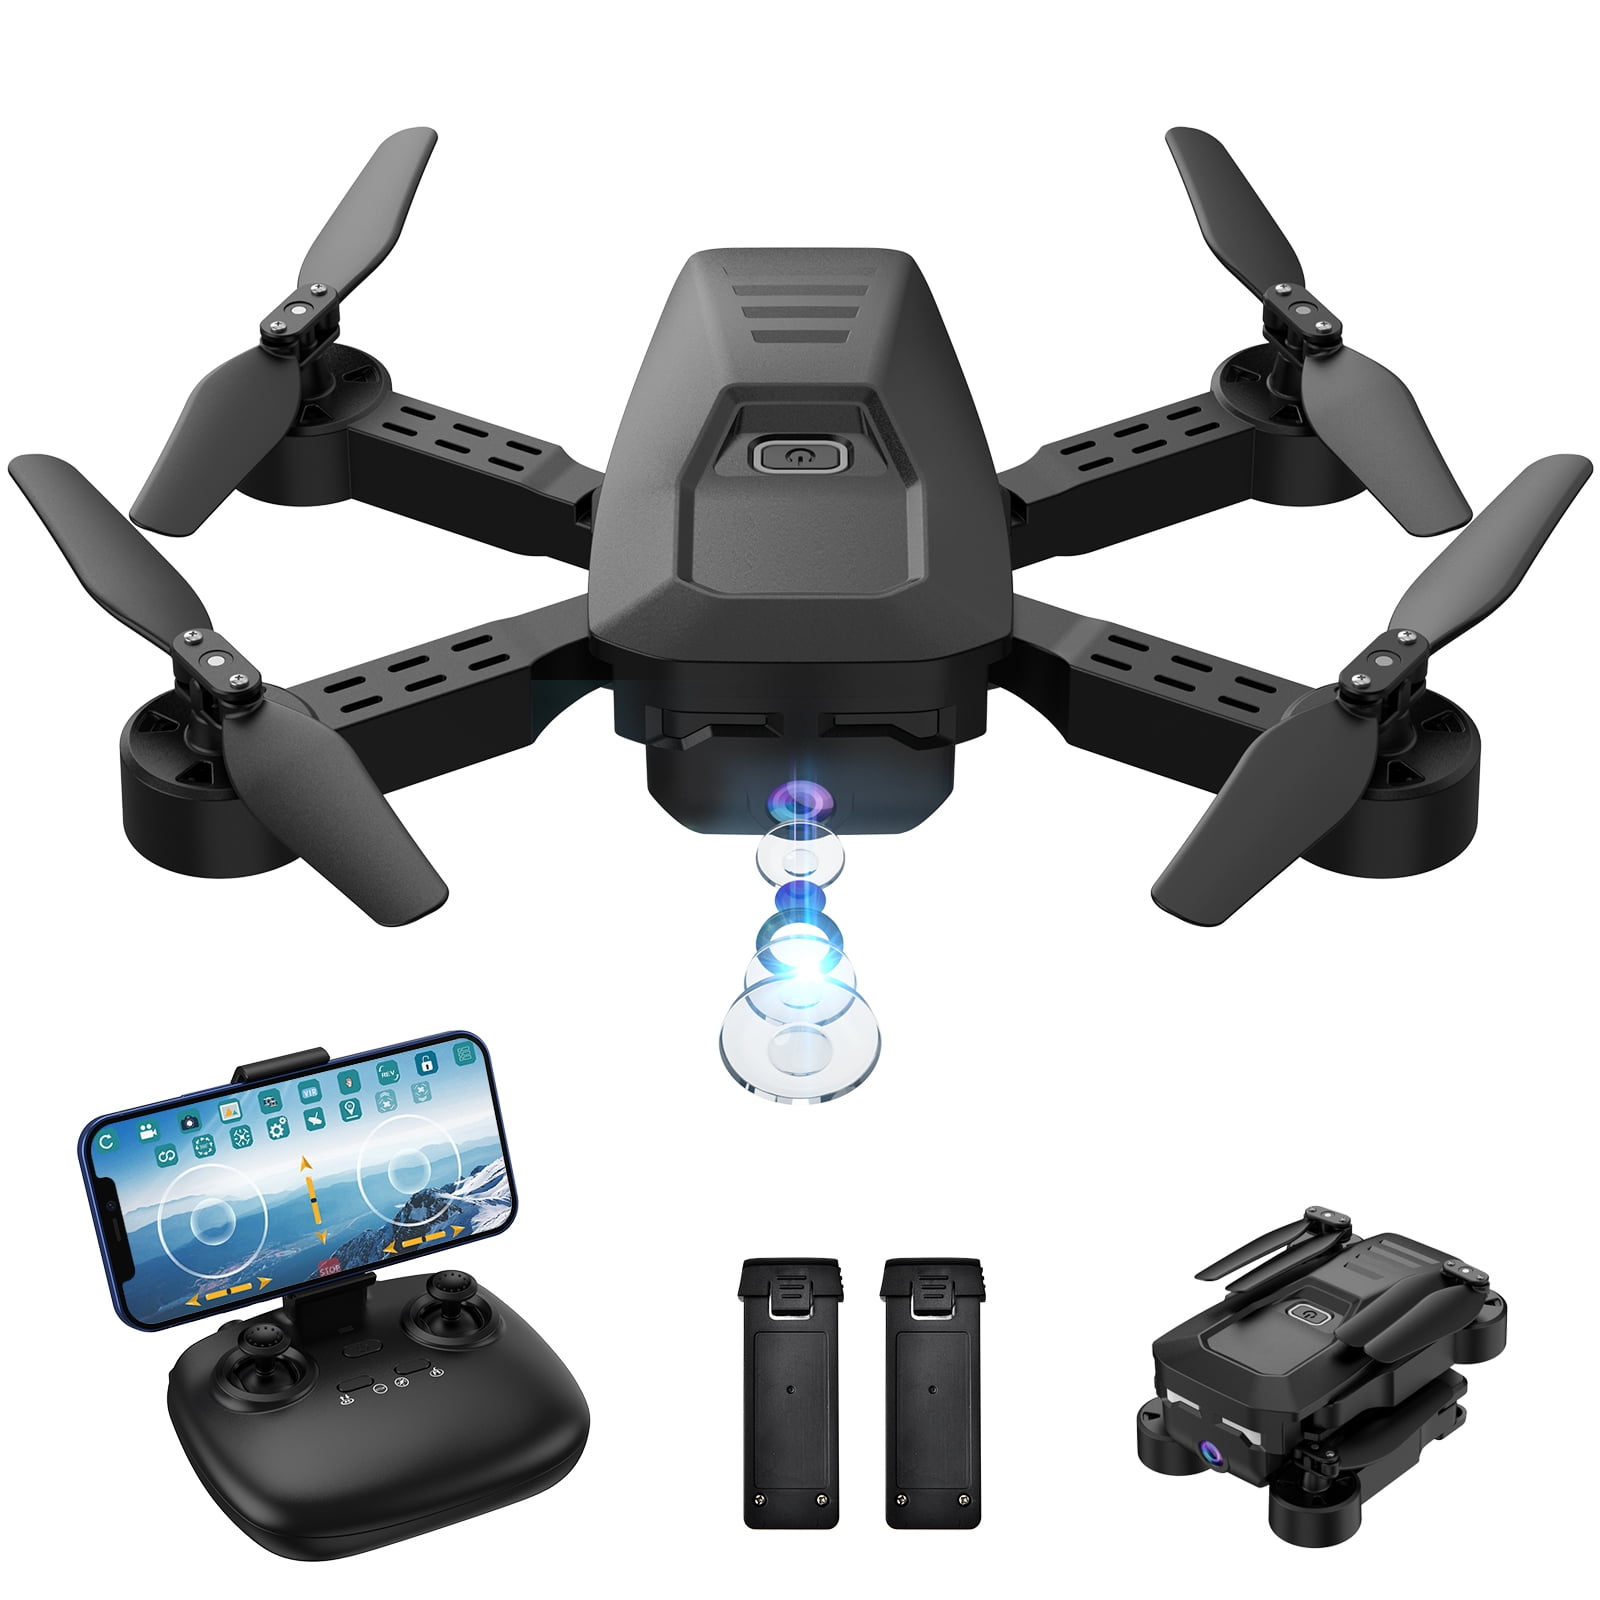 About 20 mins Long Flying Time Drone KY601S Wifi FPV Wide-angle Lens HD Camera 